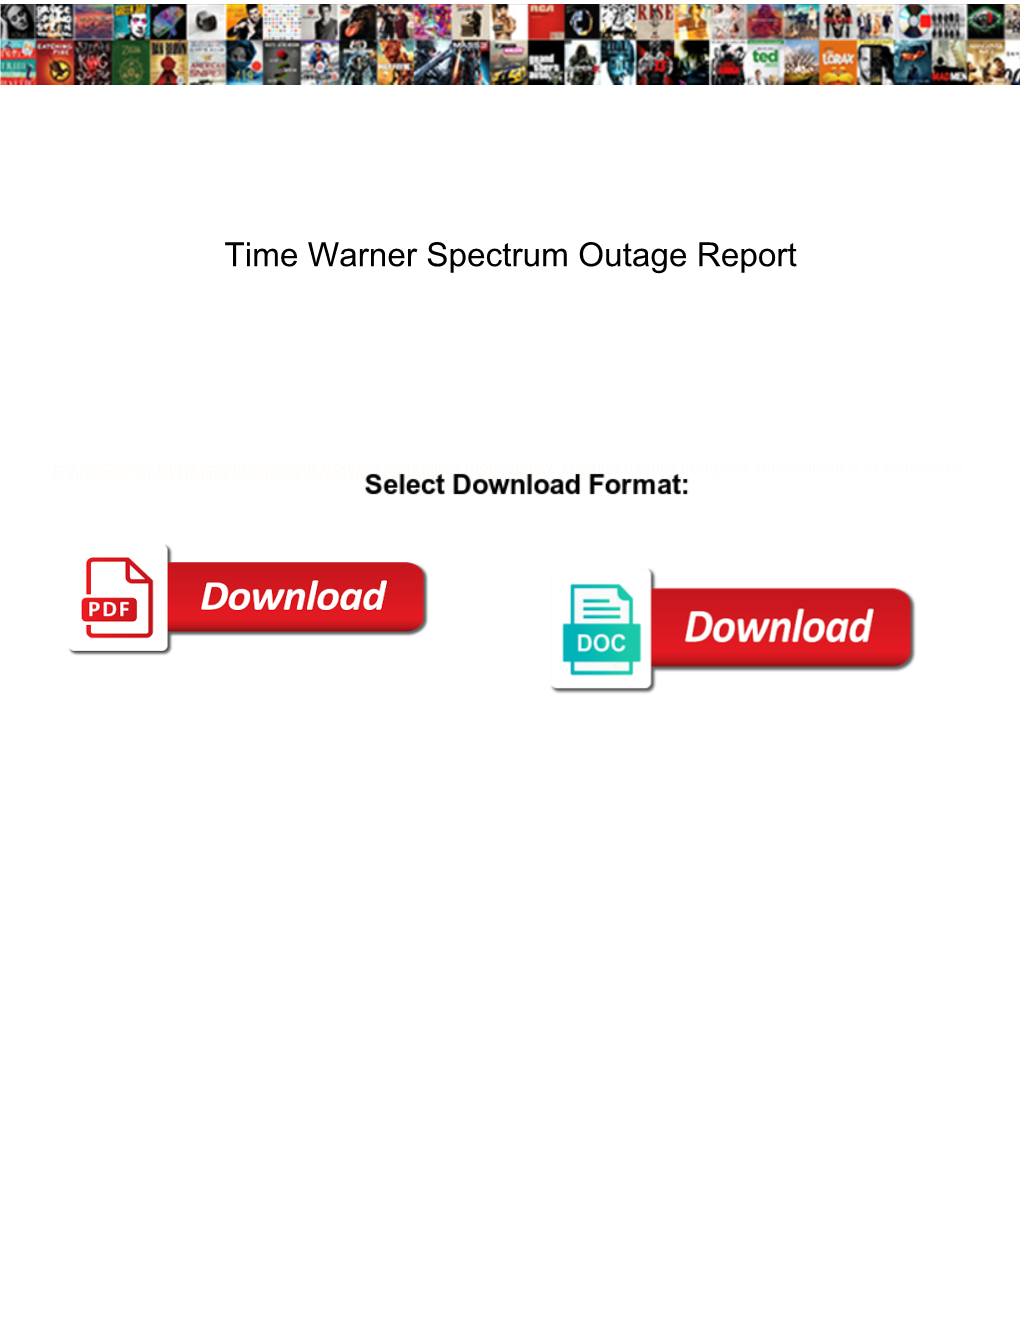 Time Warner Spectrum Outage Report